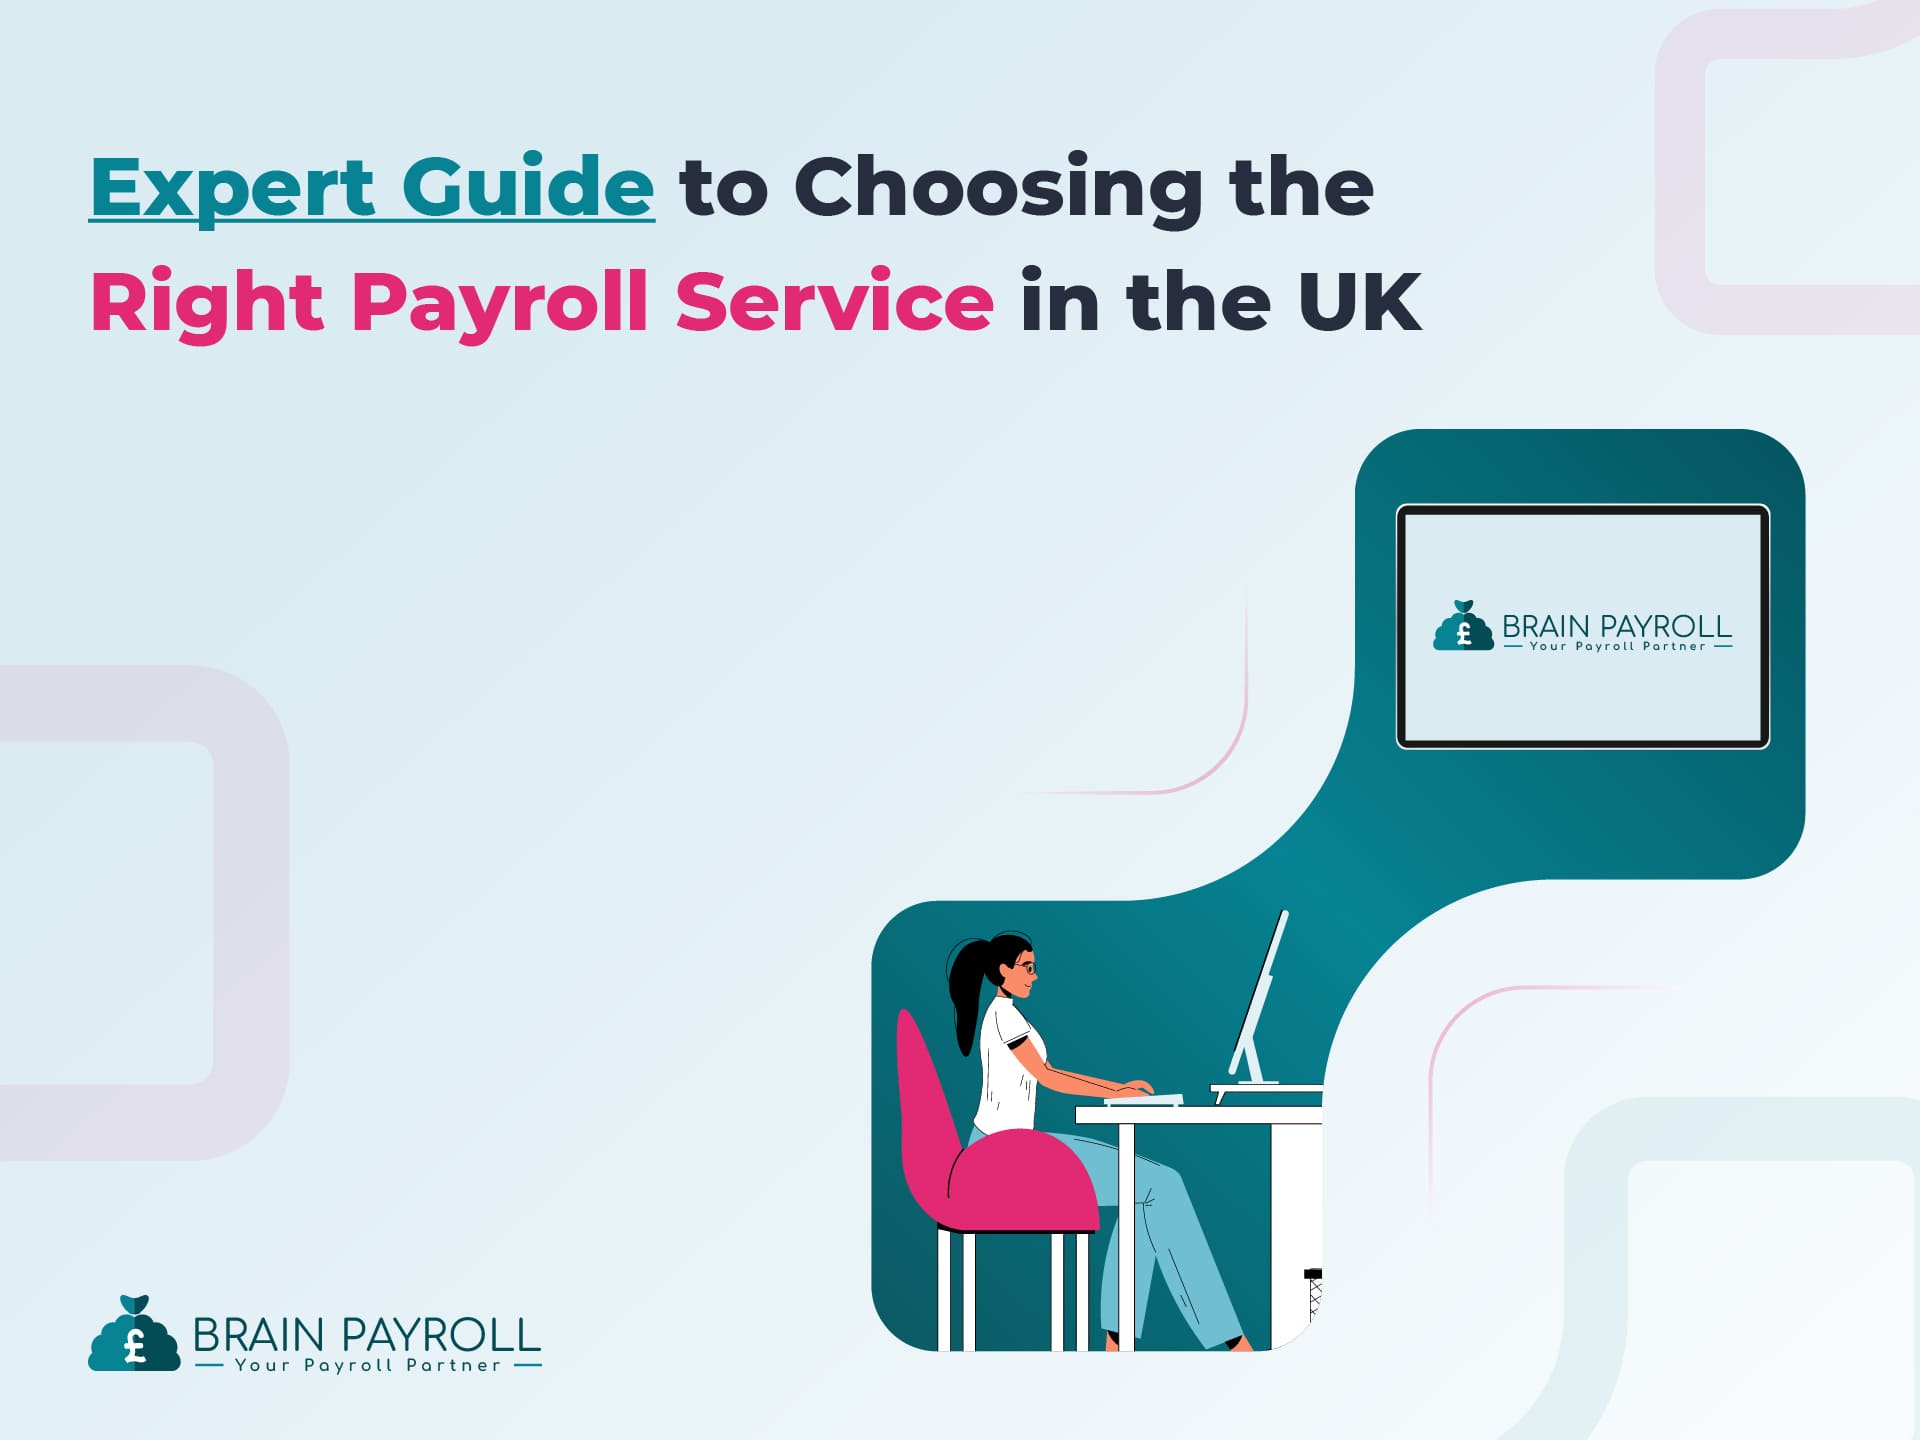 Expert Guide to Choosing the Right Payroll Service in the UK